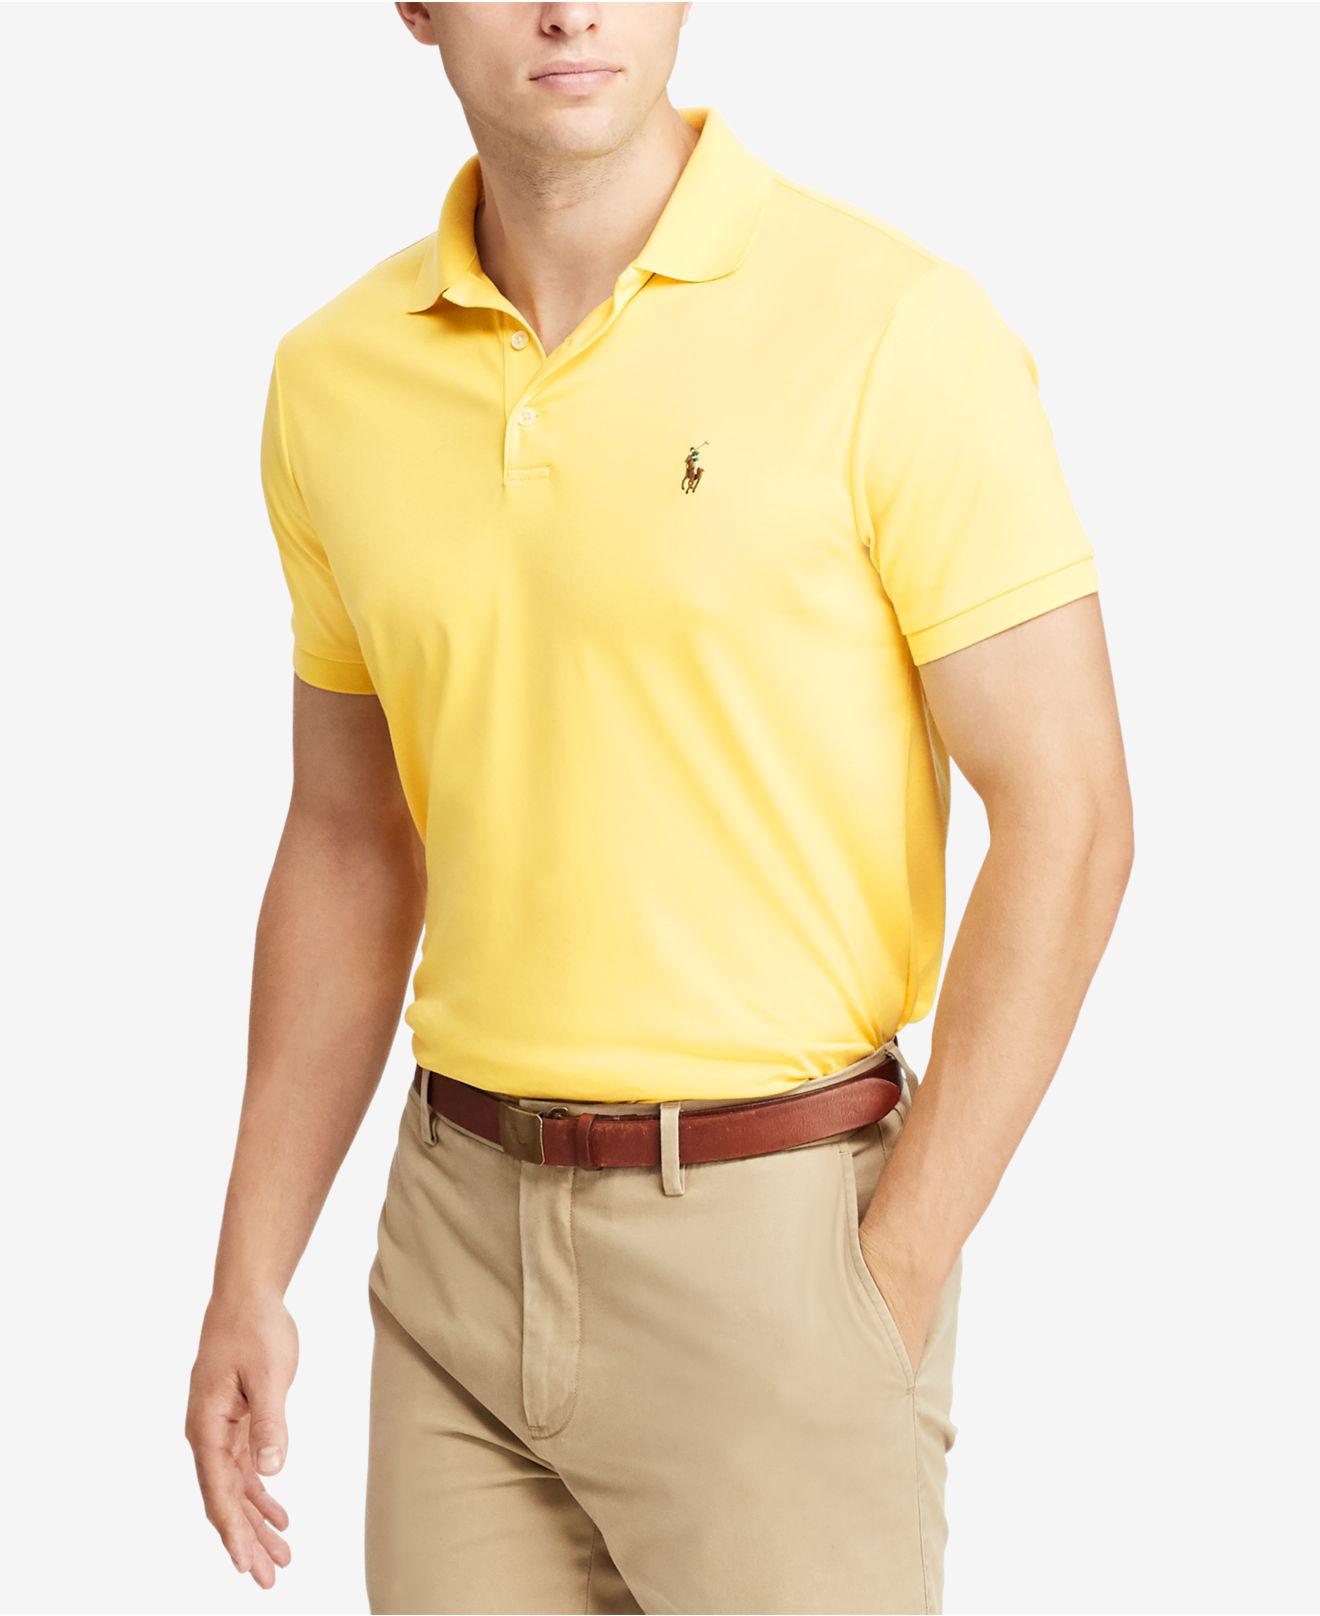 Lyst - Polo Ralph Lauren Classic Fit Cotton Polo in Yellow for Men